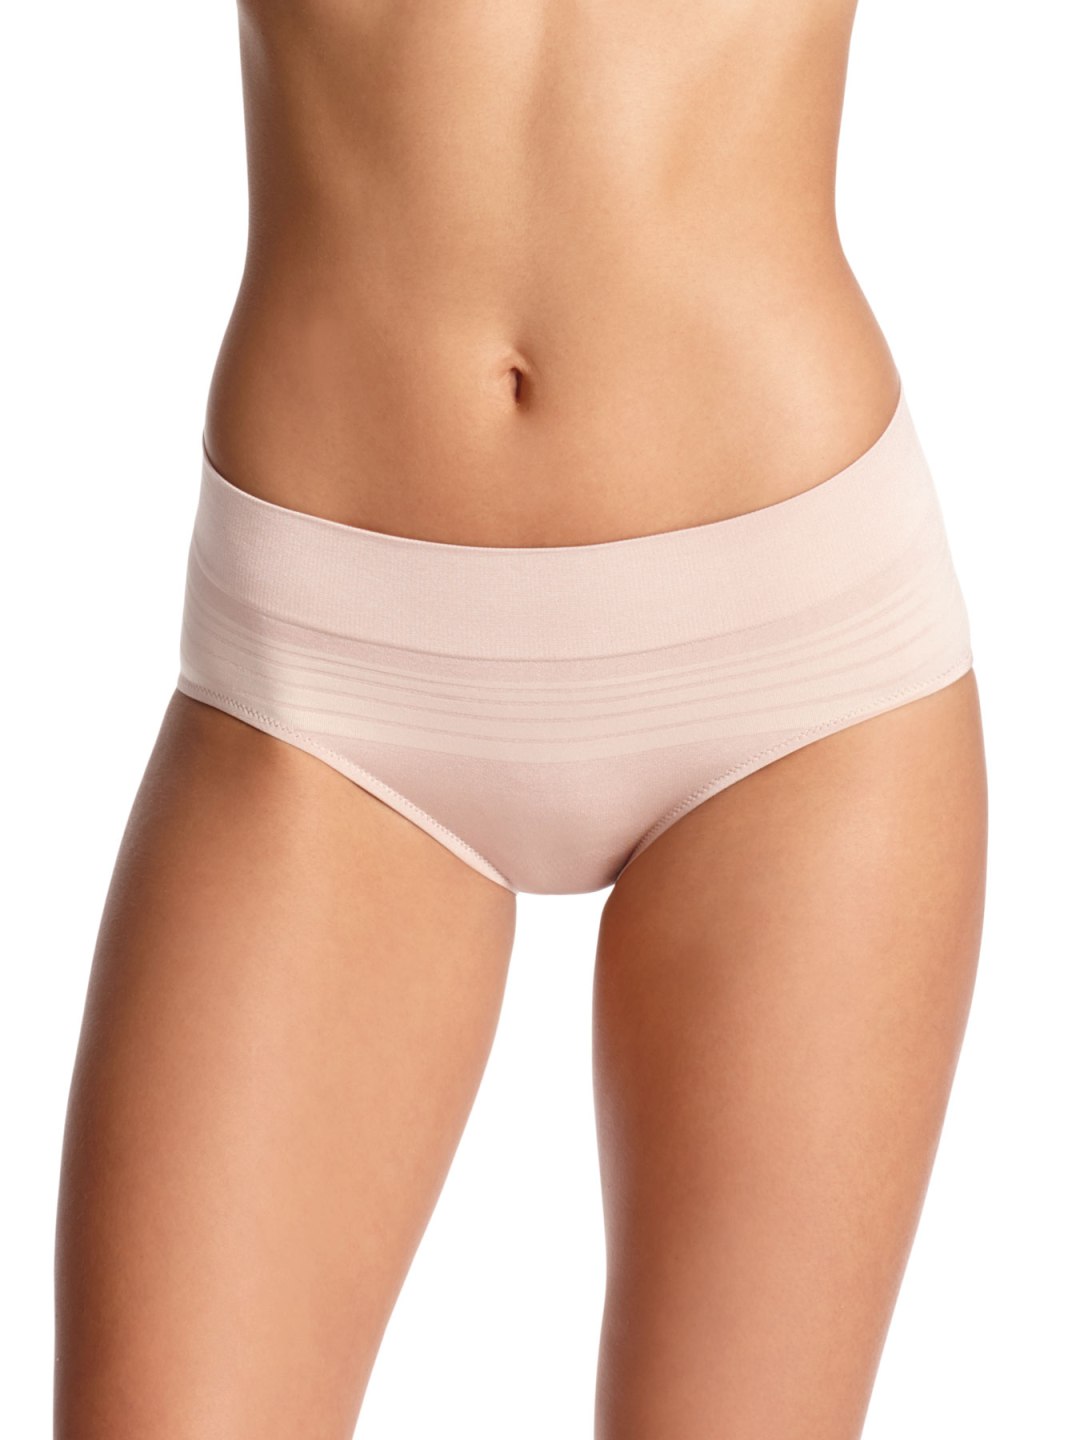 We Finally Found The Best Underwear To Wear With White Jeans, So You Can  Stop Looking! - SHEfinds